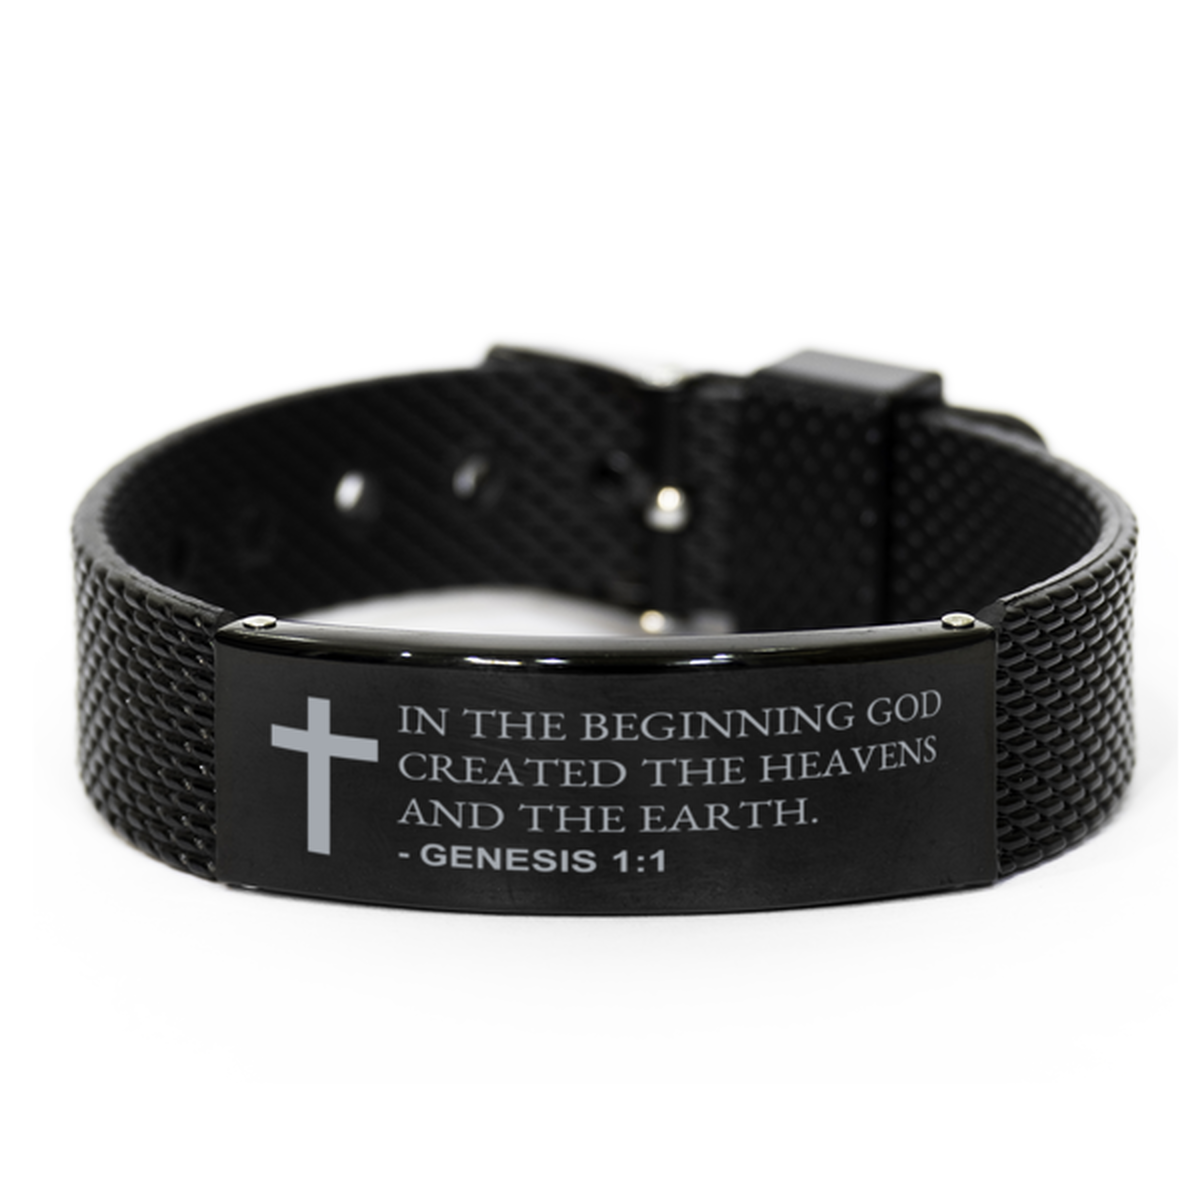 Christian Black Bracelet,, Genesis 1:1 In The Beginning God Created The Heavens And The, Motivational Bible Verse Gifts For Men Women